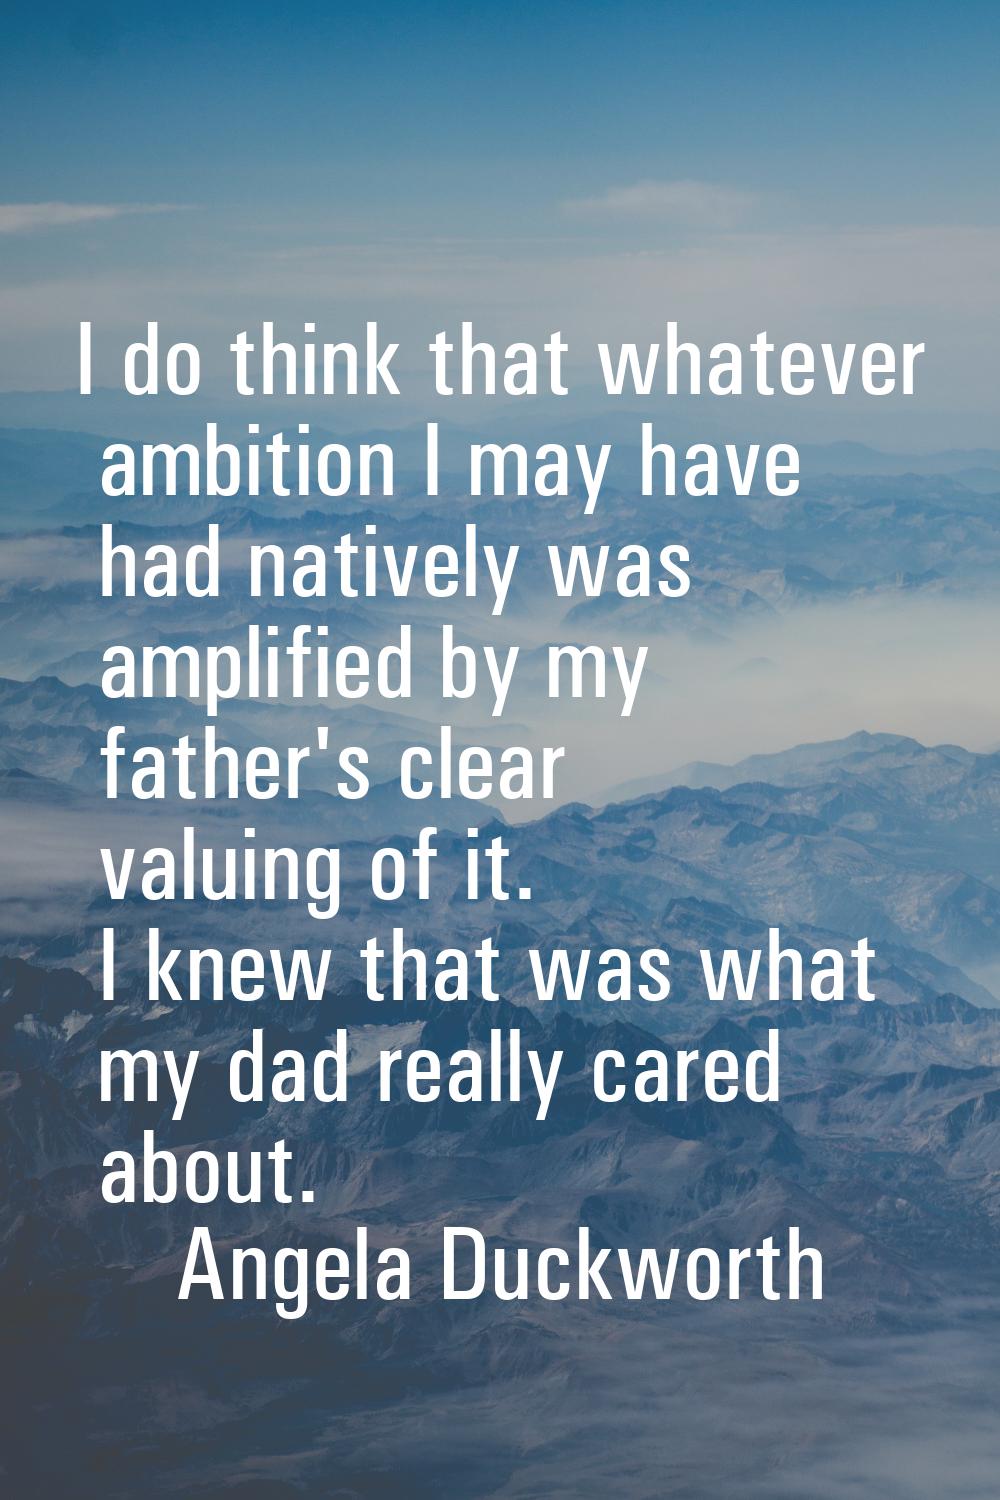 I do think that whatever ambition I may have had natively was amplified by my father's clear valuin